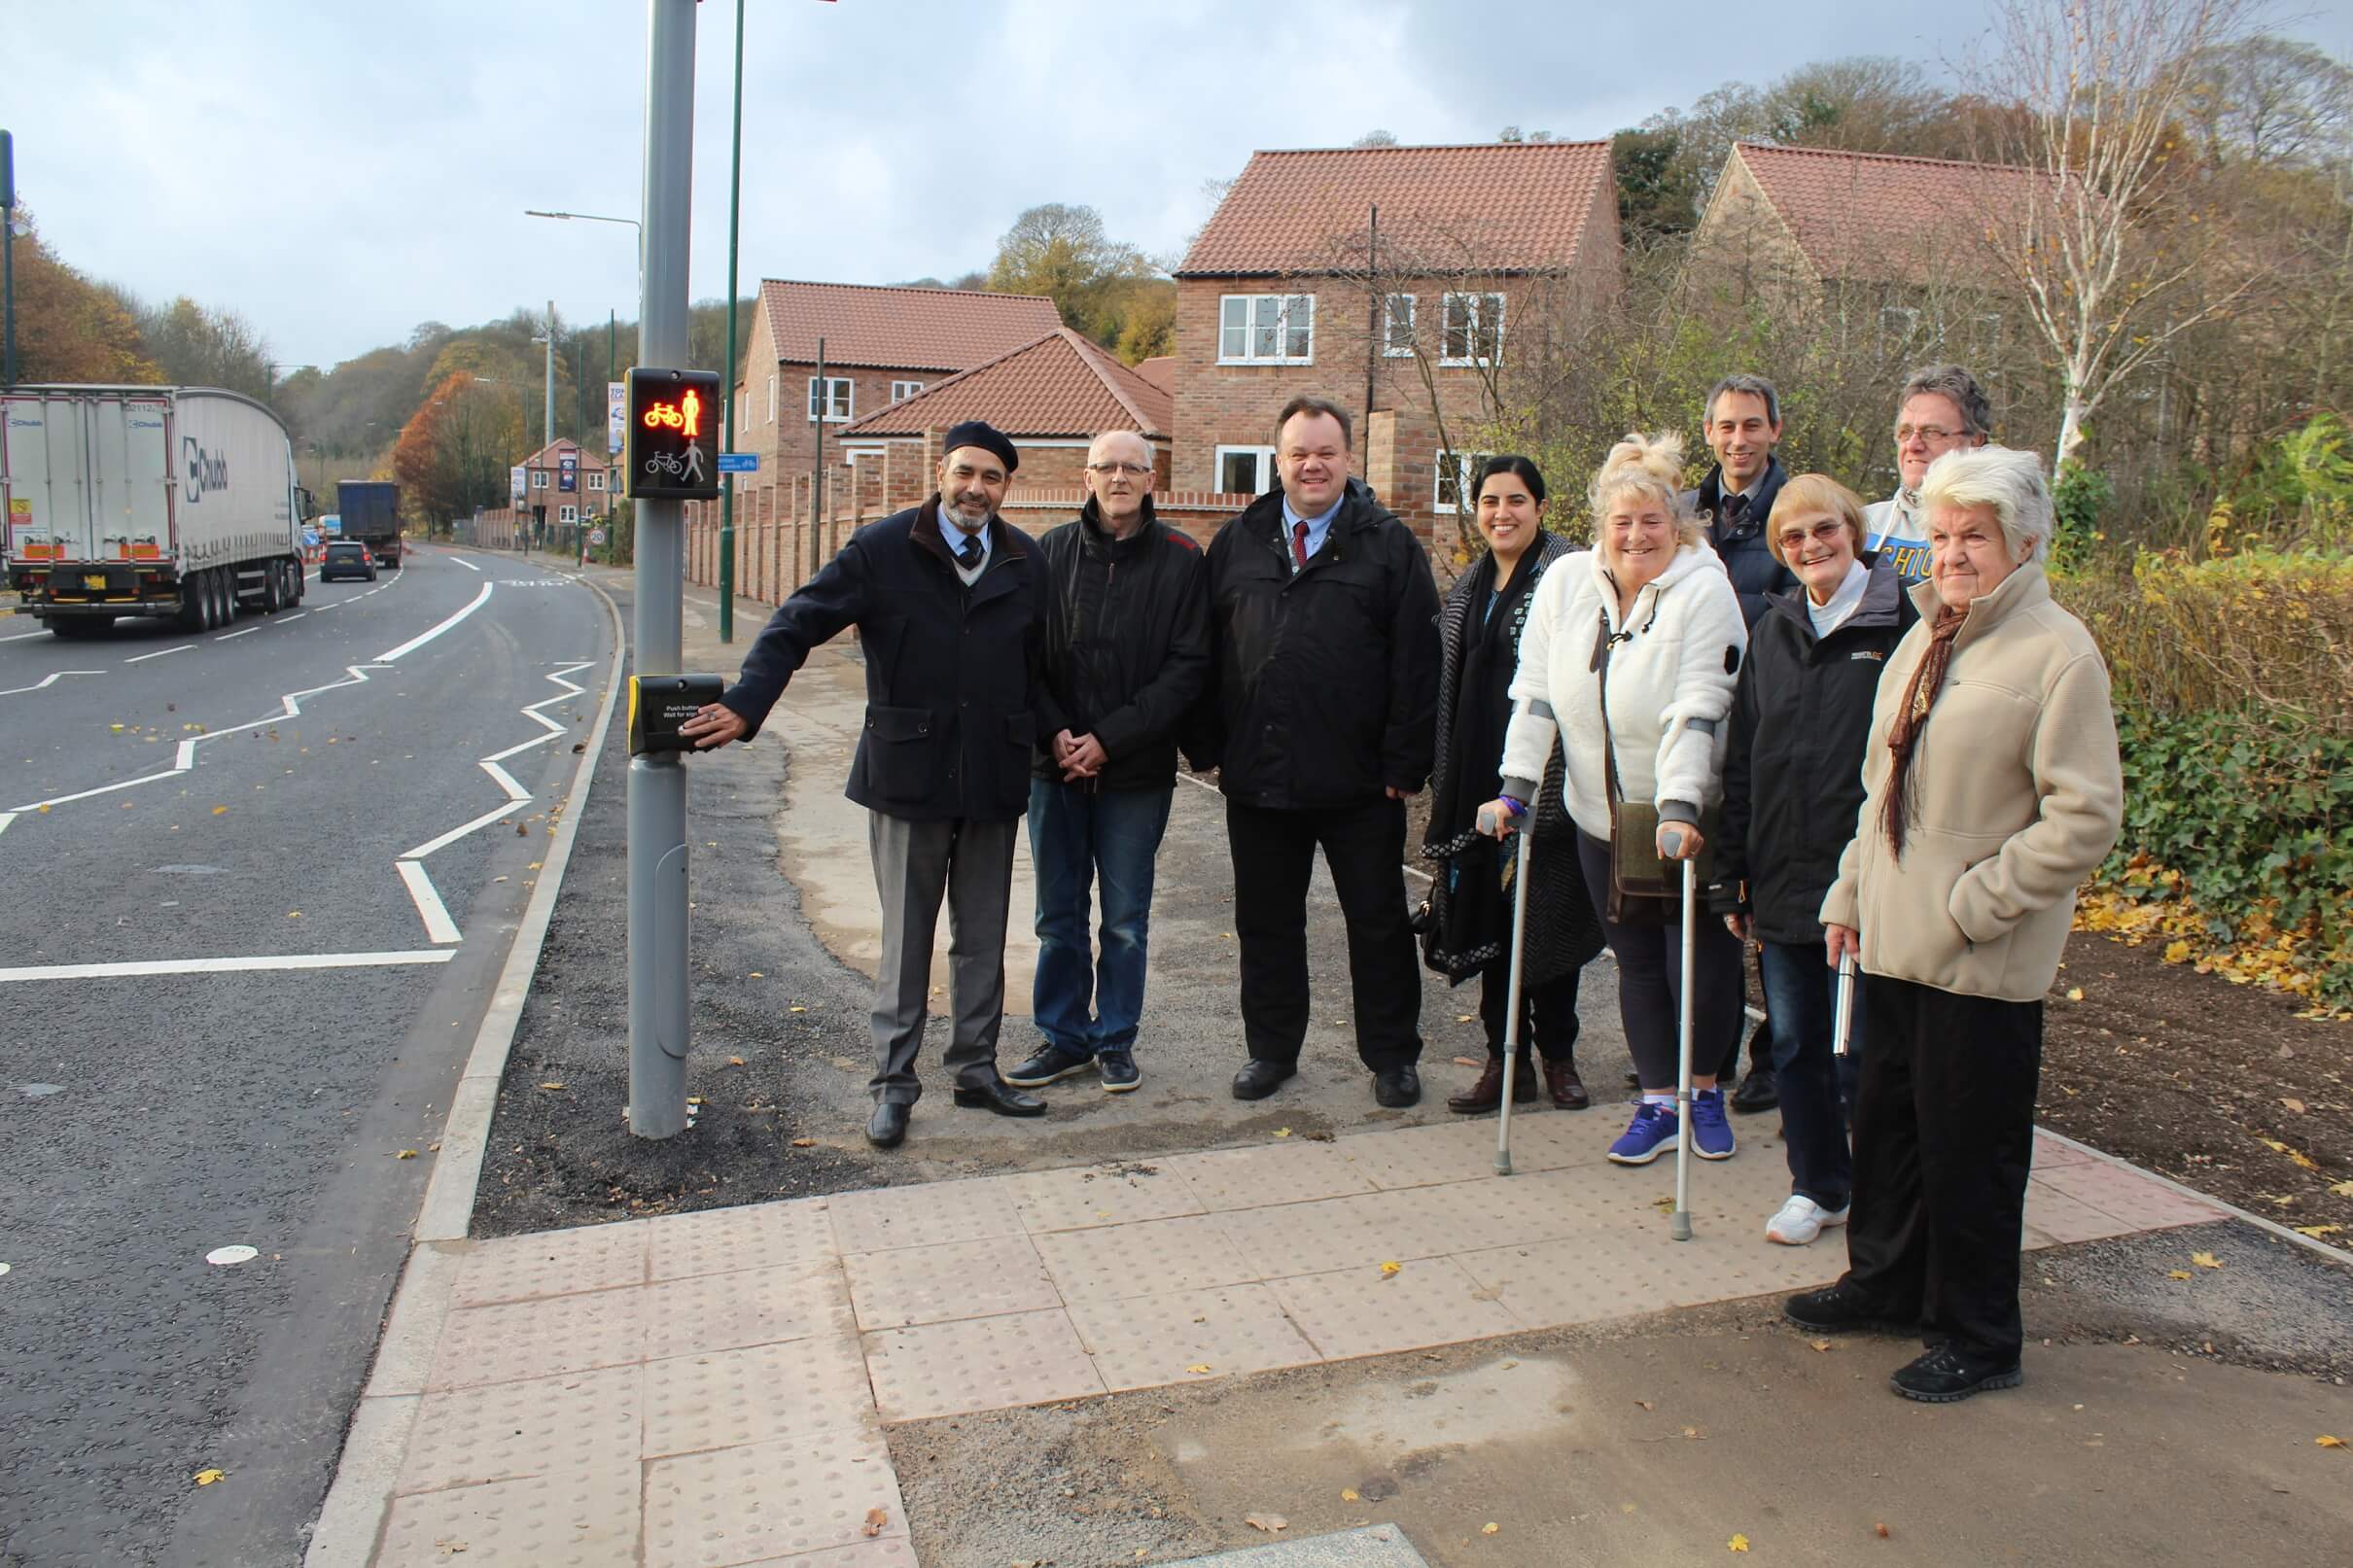 Residents using the new pedestrian crossing on Daleside Road